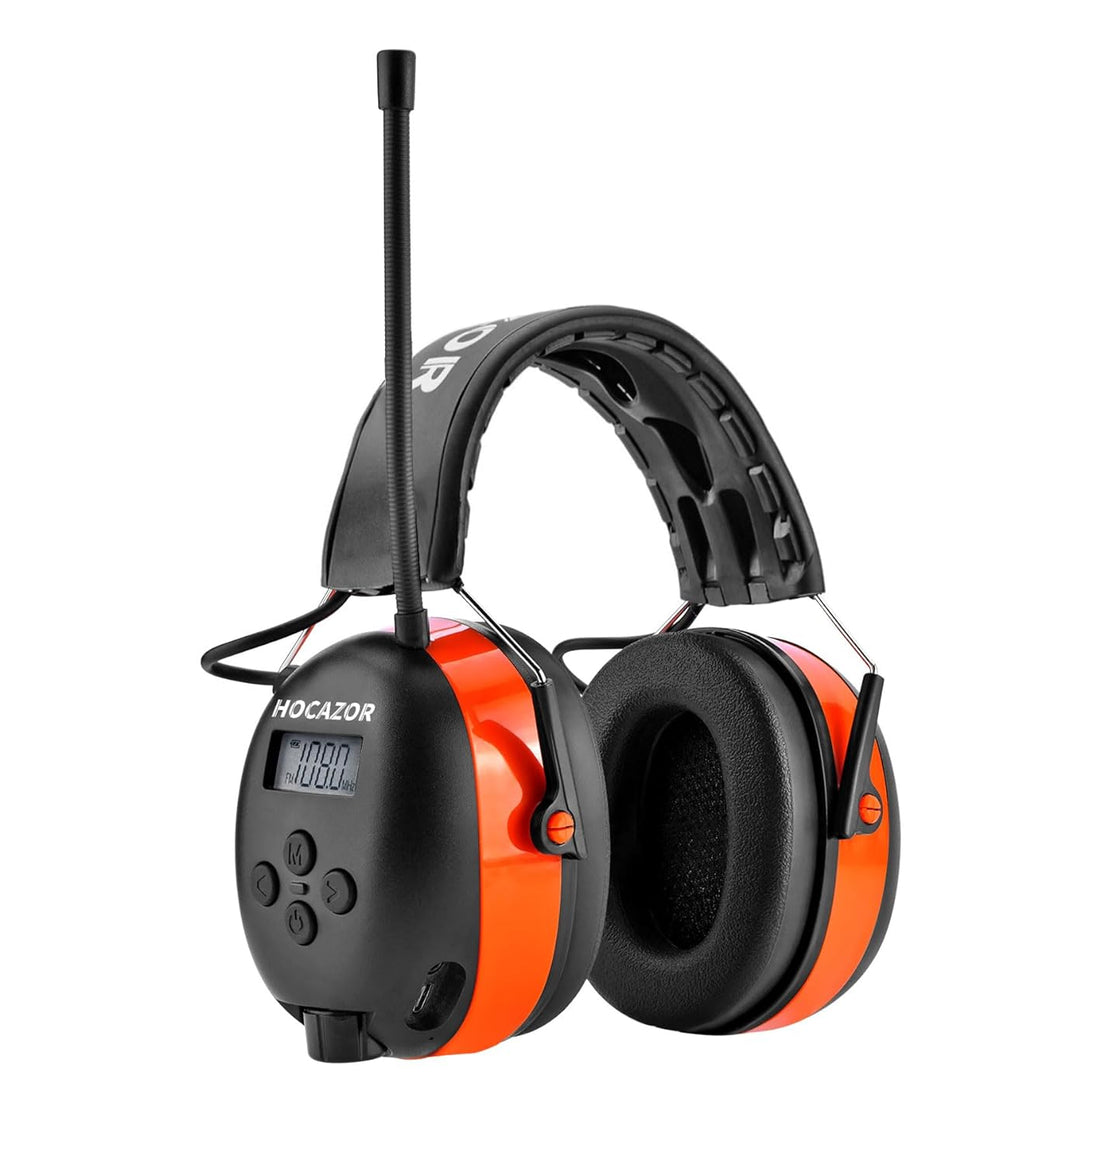 Hocazor HP033 Bluetooth AM FM Radio Headphones, Type-C Charging Port Hearing Protection Earmuffs with Rechargeable 2000mAh Battery for Mowing, Snowblowing, Workshops, Orange